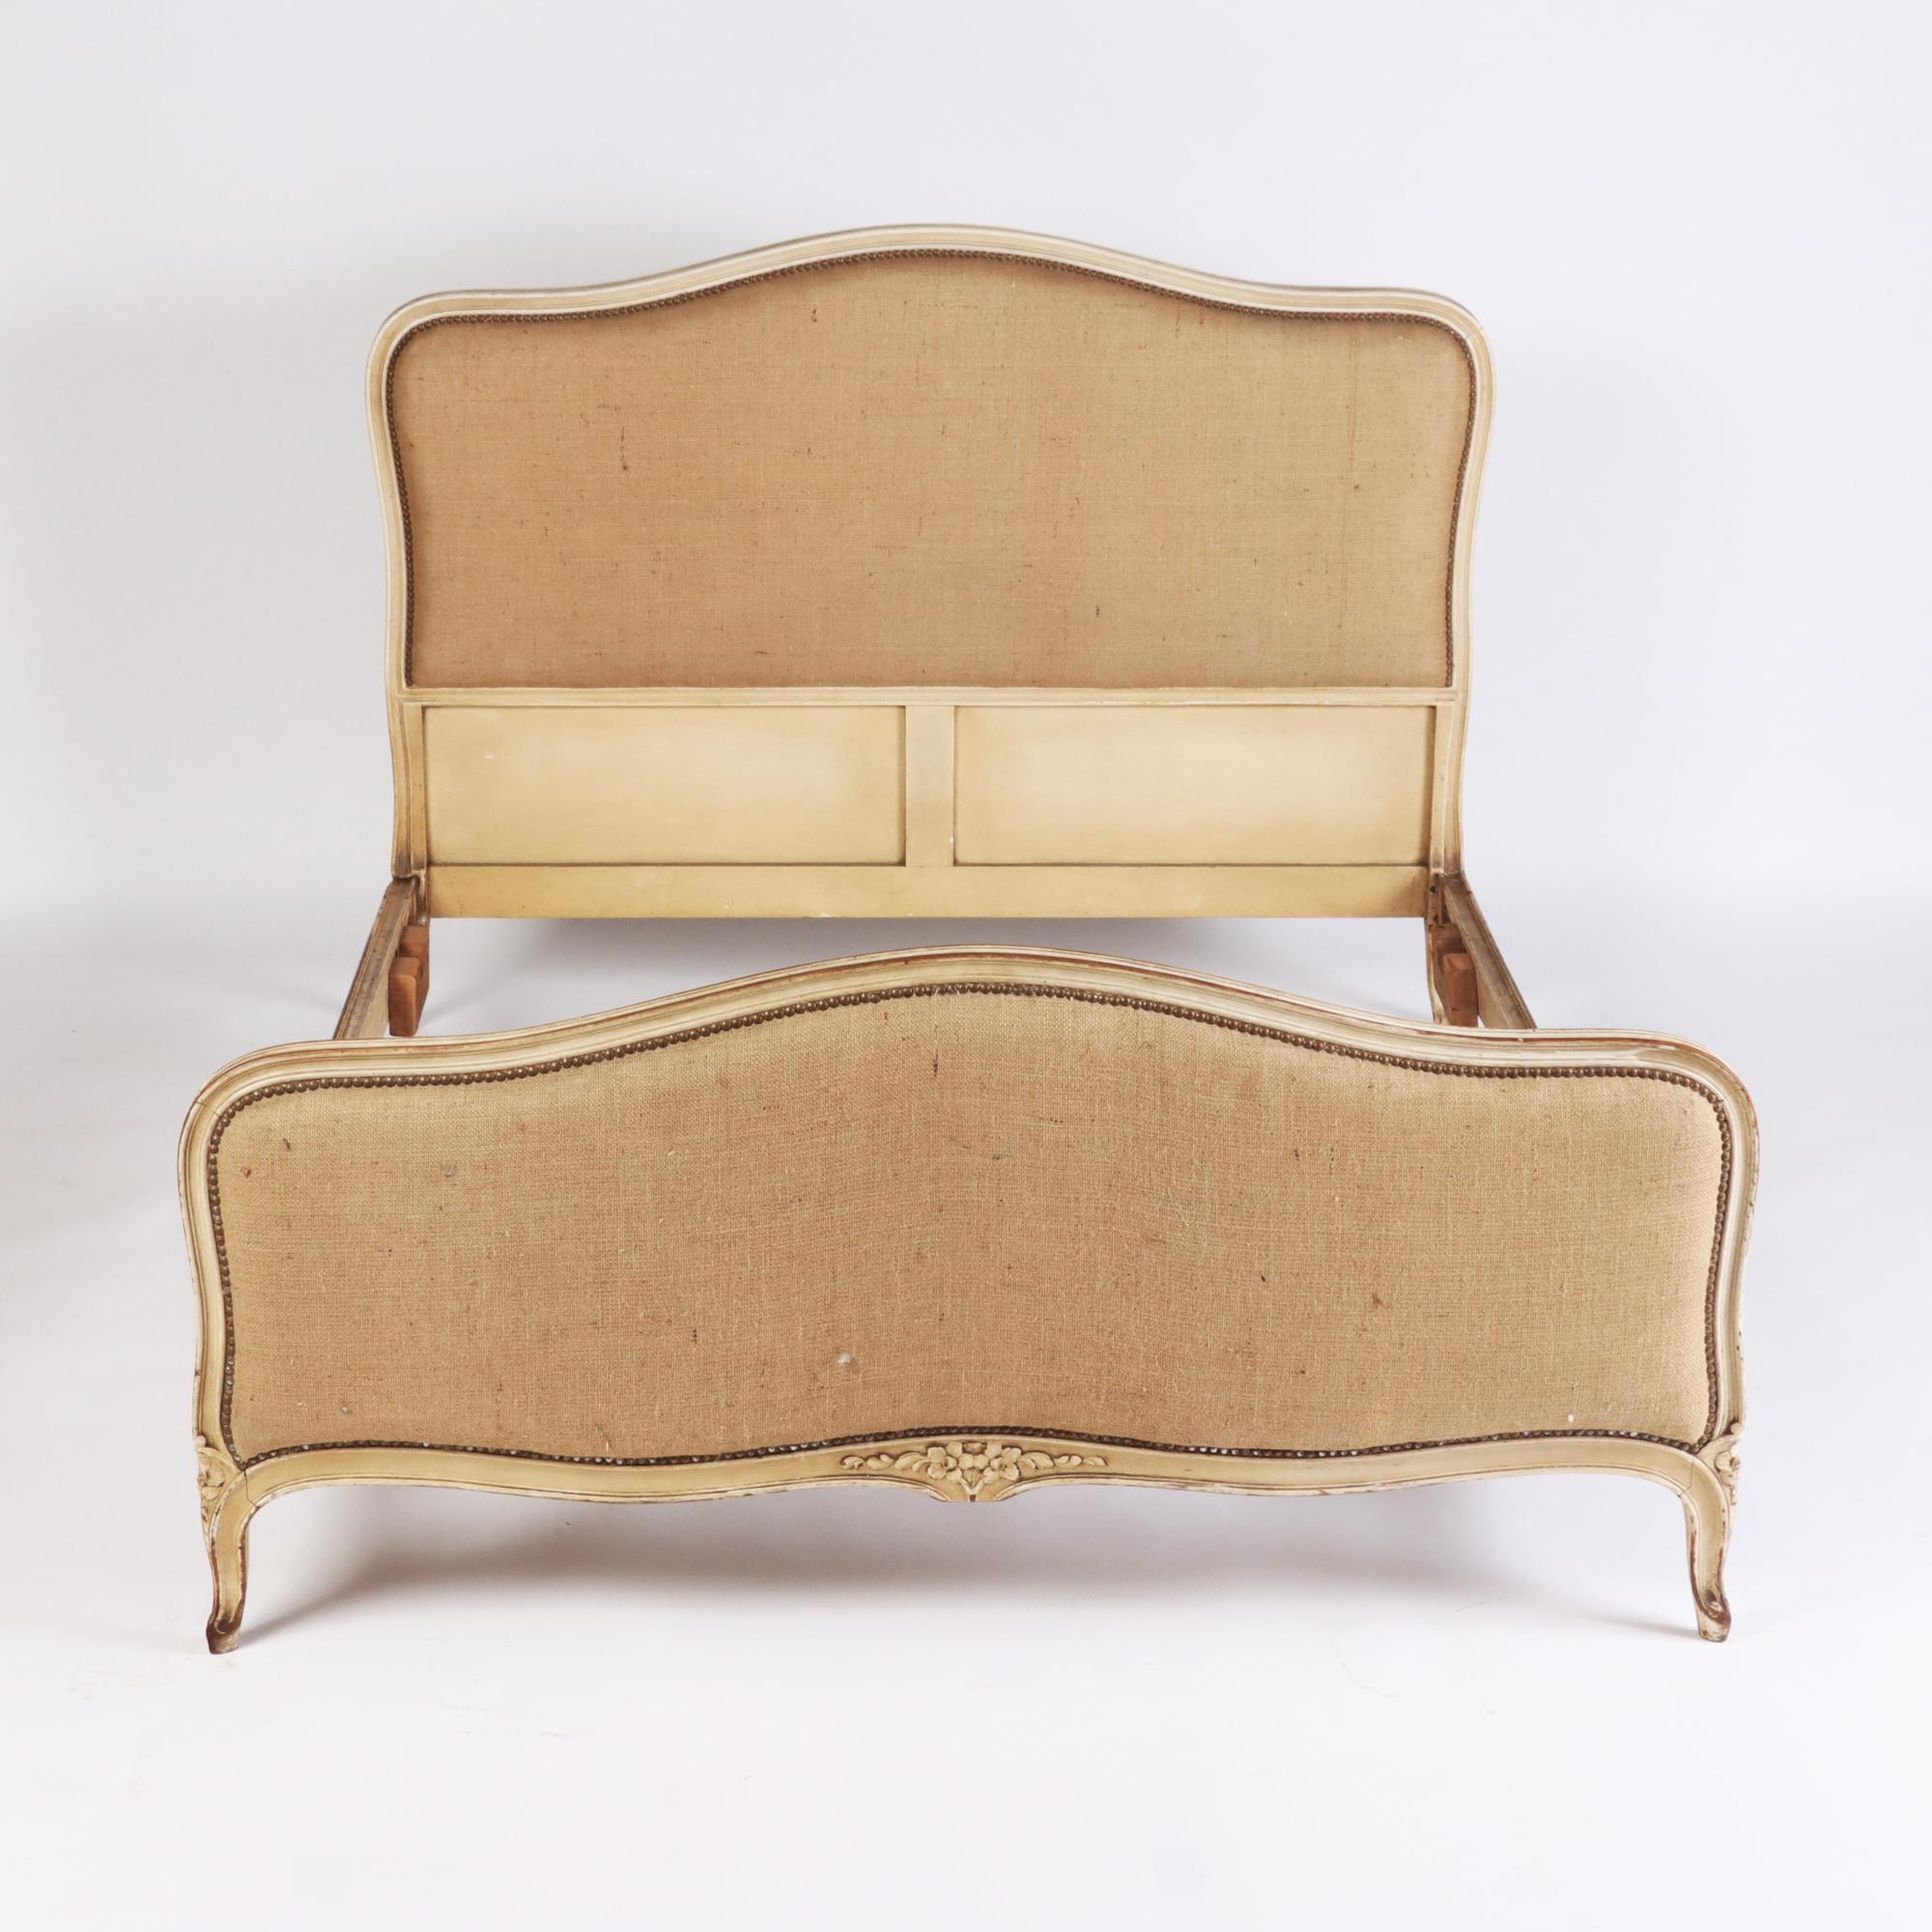 A French Louis XV style nearly Queen size painted bed with burlap upholstery. Circa 1920.
 Interior: 79